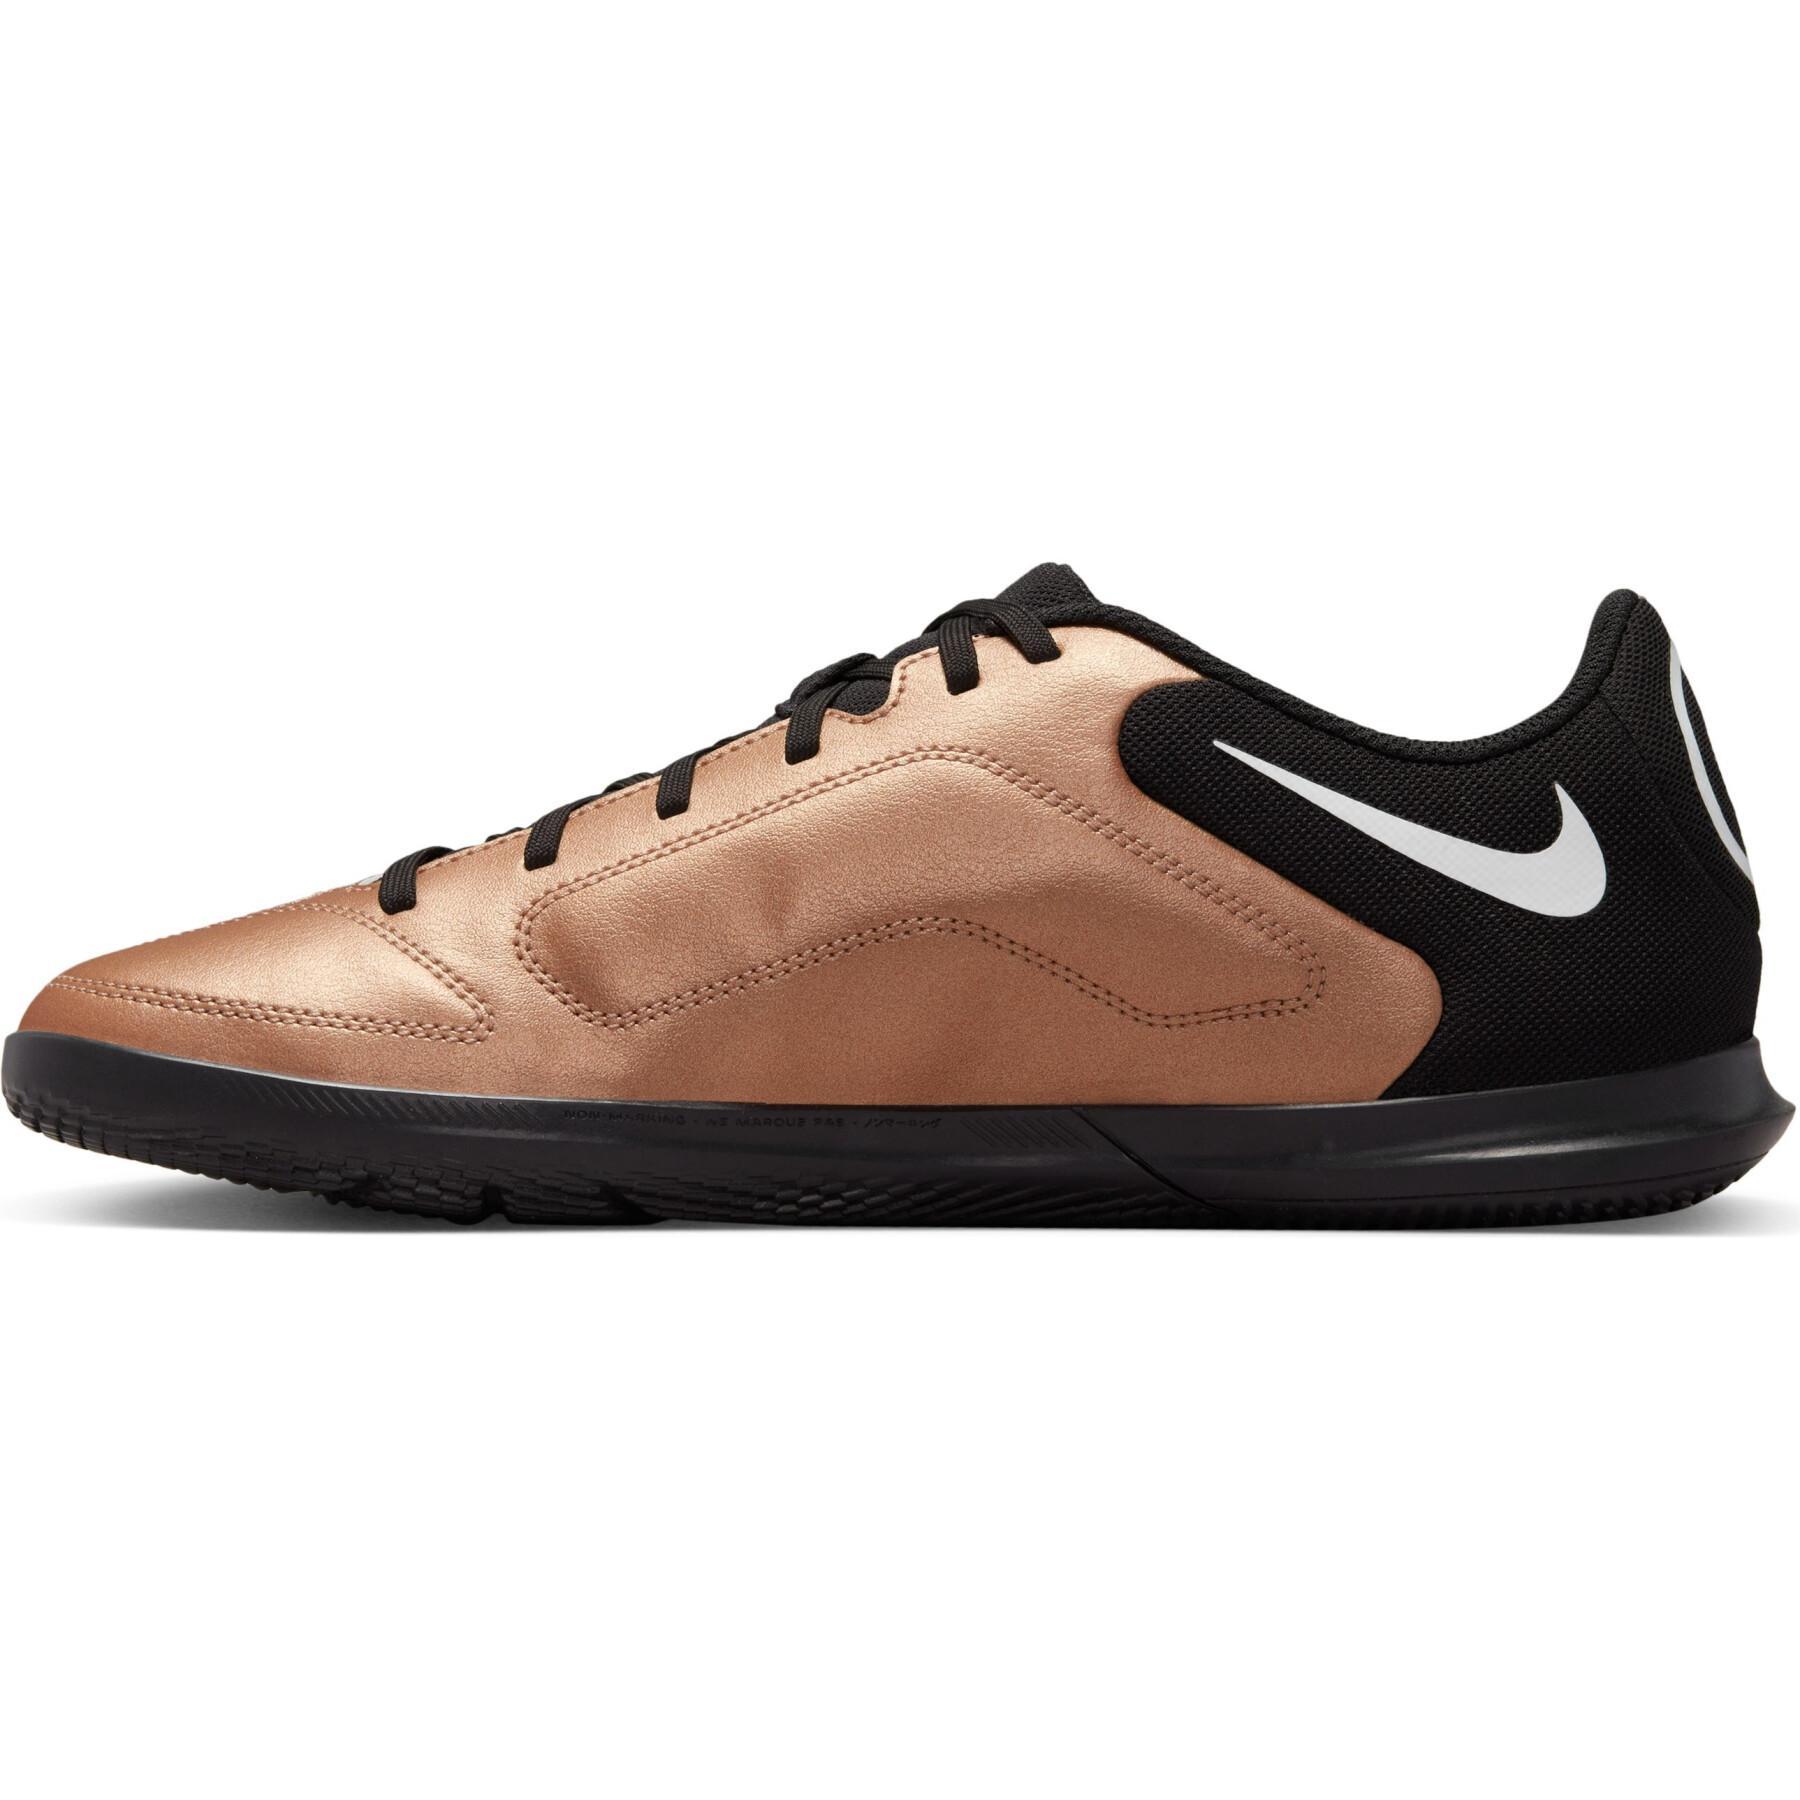 Soccer shoes Nike Tiempo Legend 9 Club IC - Generation Pack